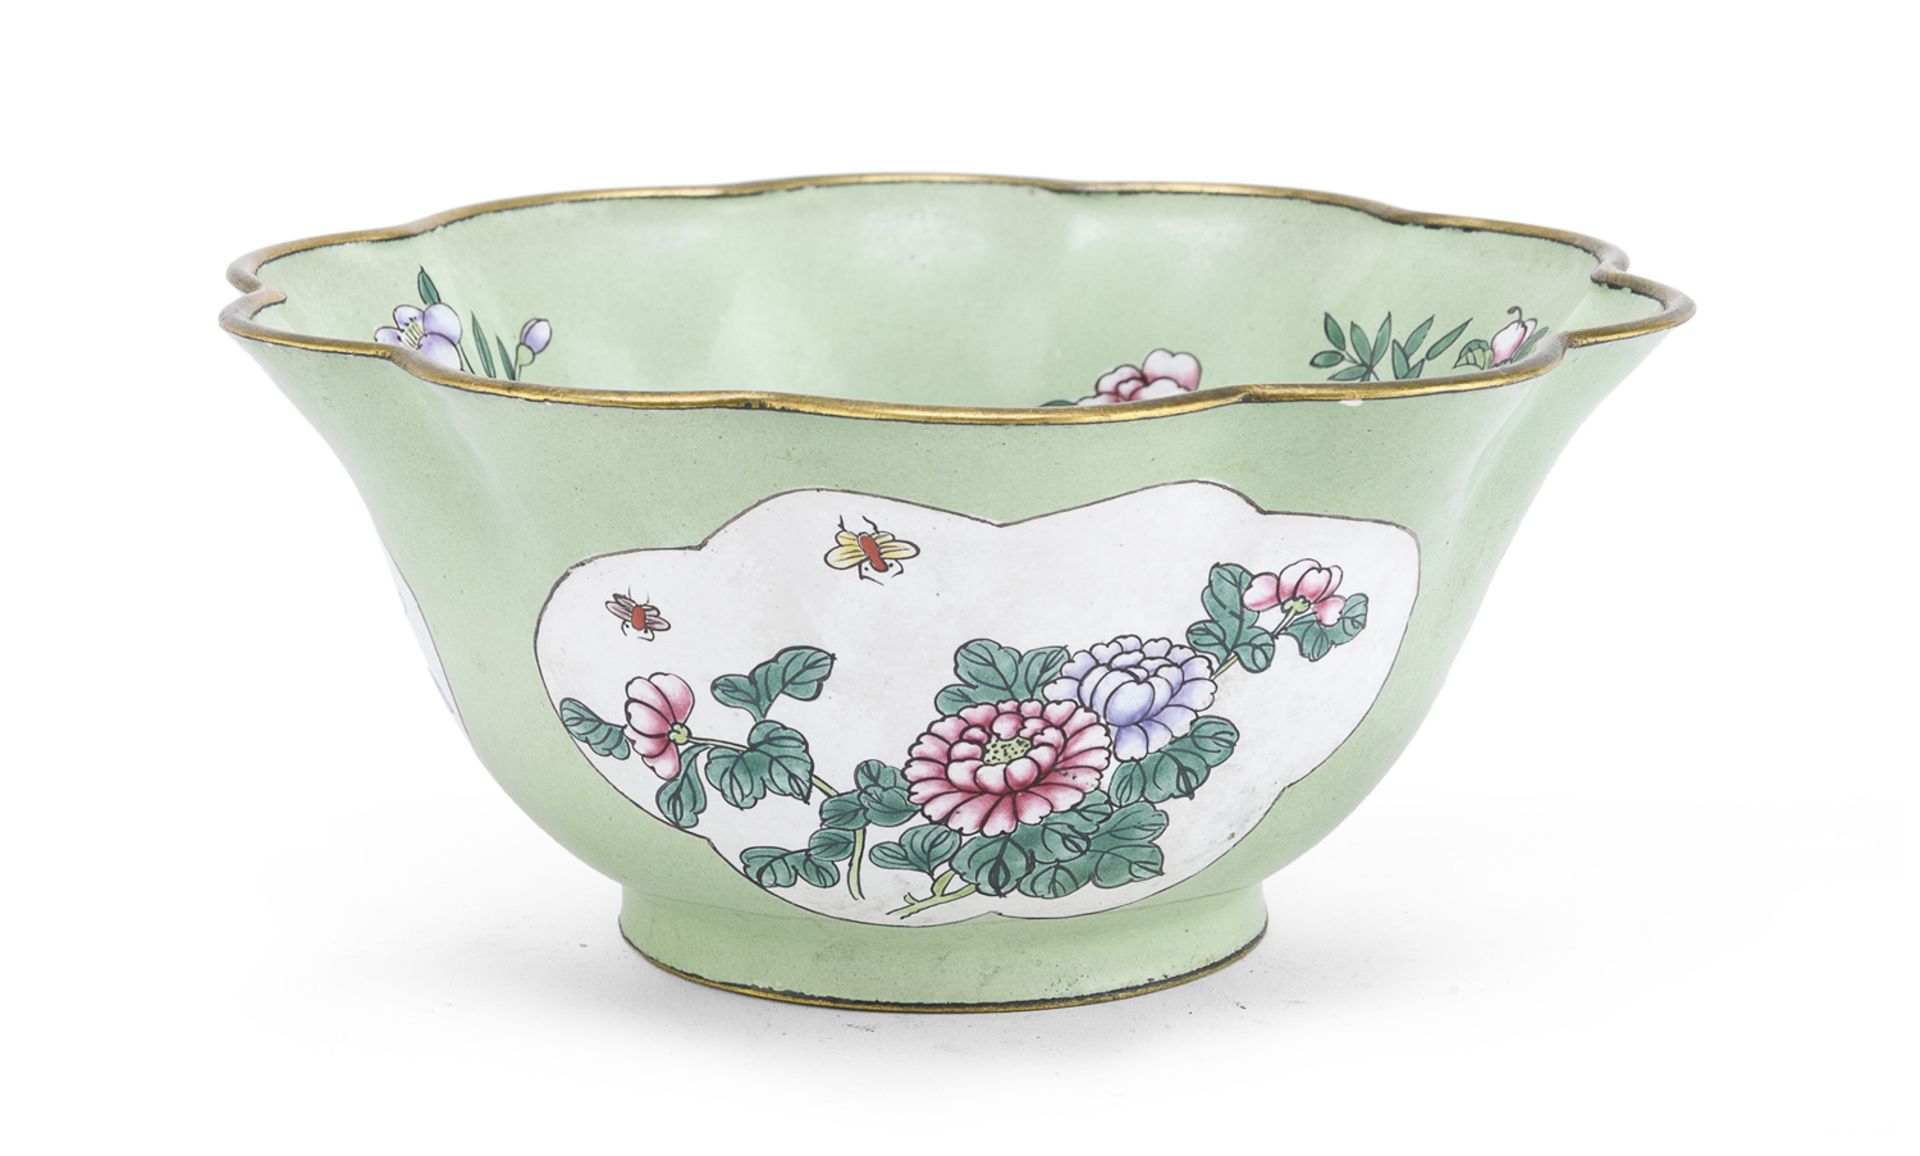 A CHINESE POLYCHROME ENAMELED METAL BOWL 20TH CENTURY.